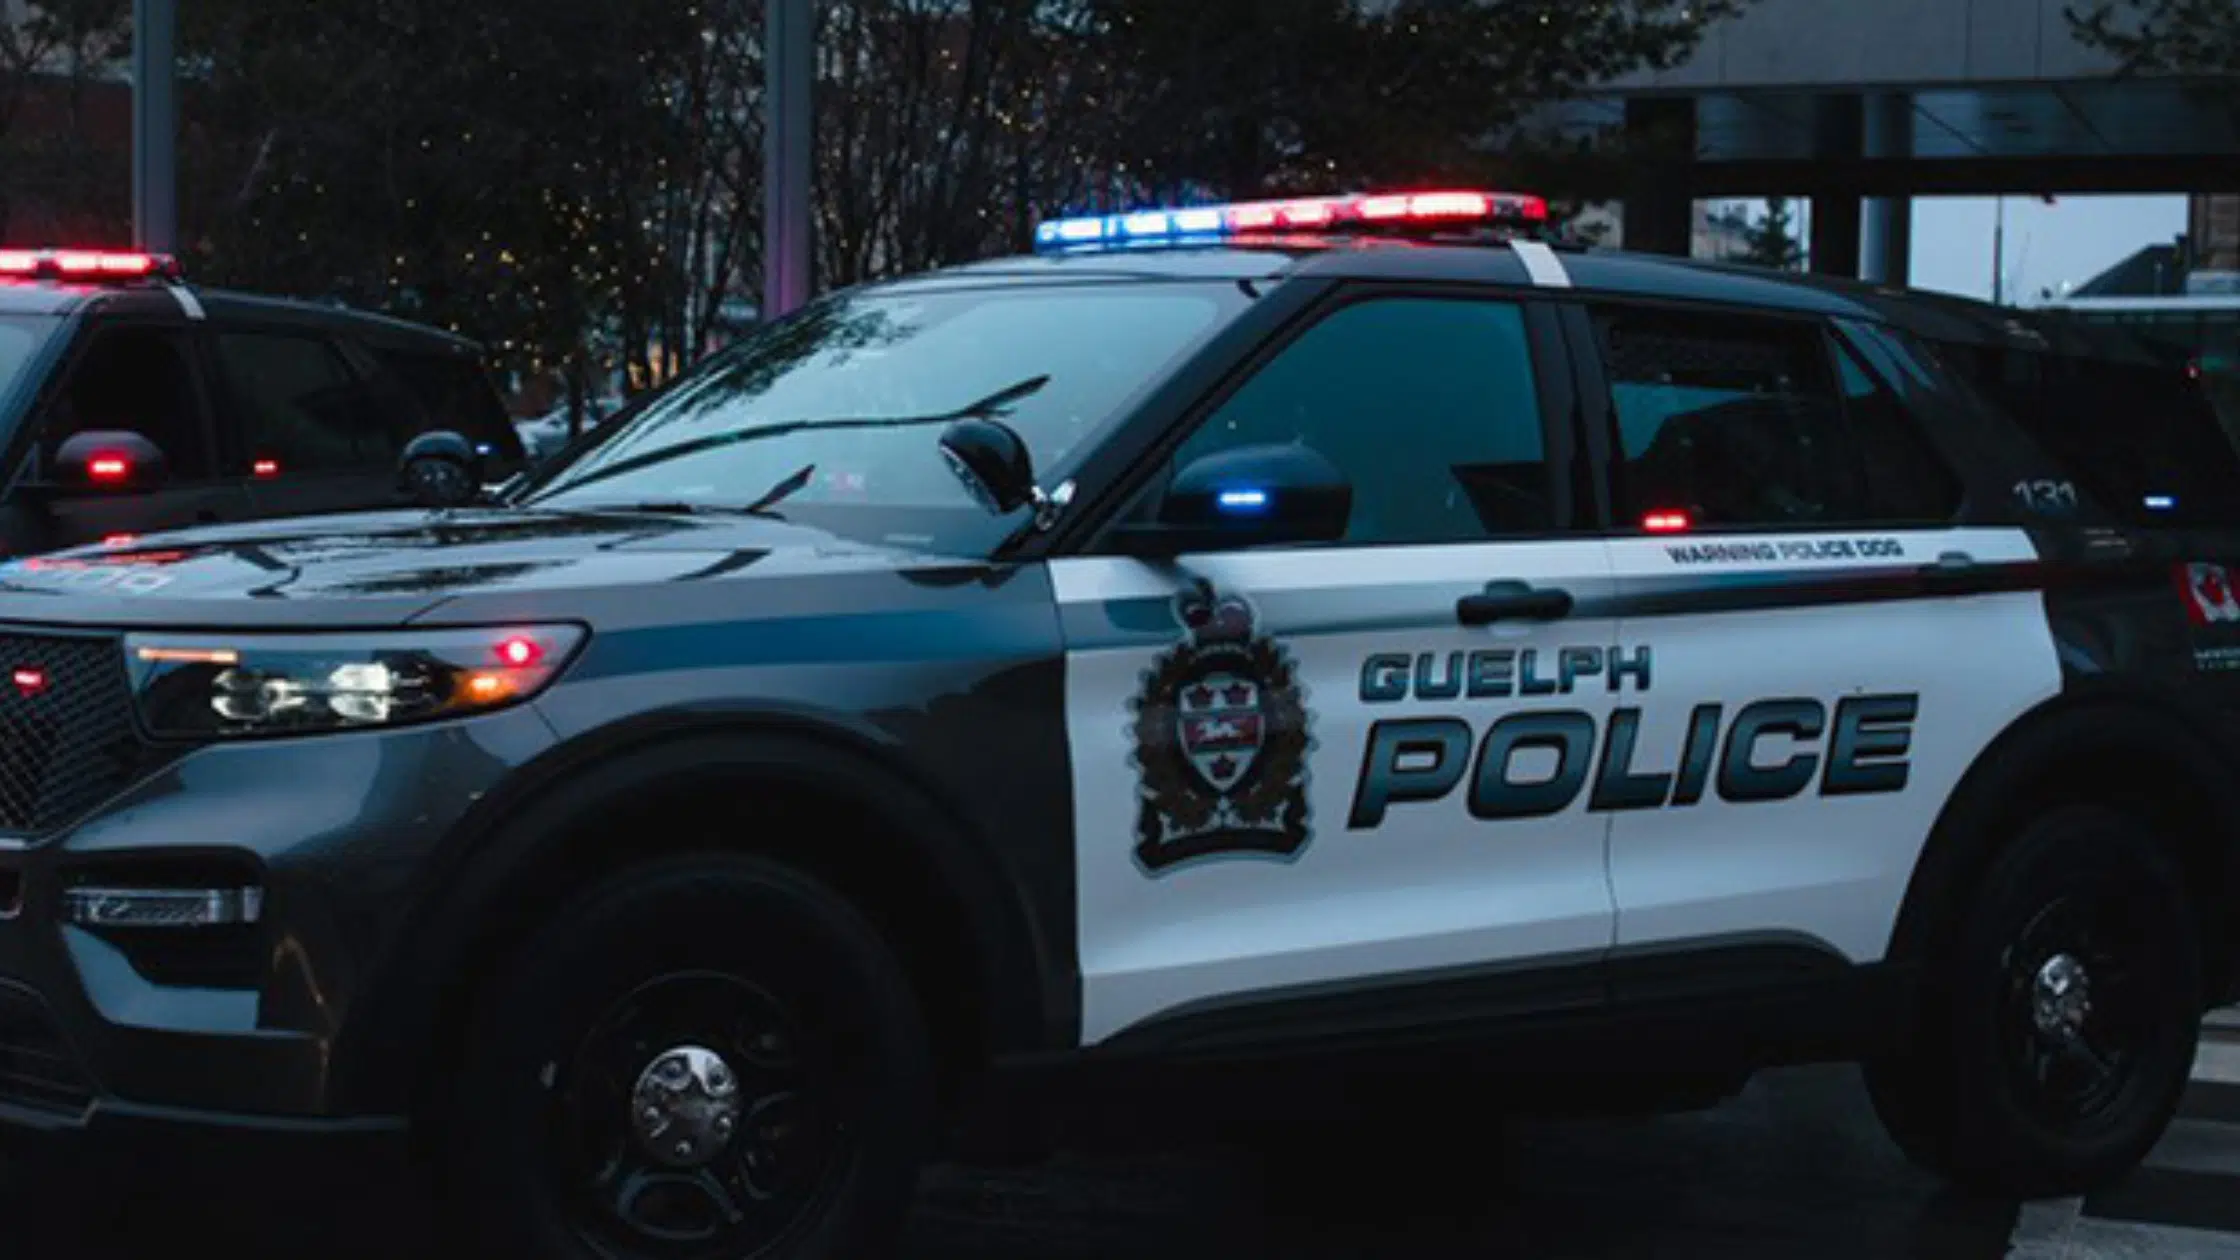 No Serious Injuries After Cyclist and Vehicle Collide in Guelph Thursday